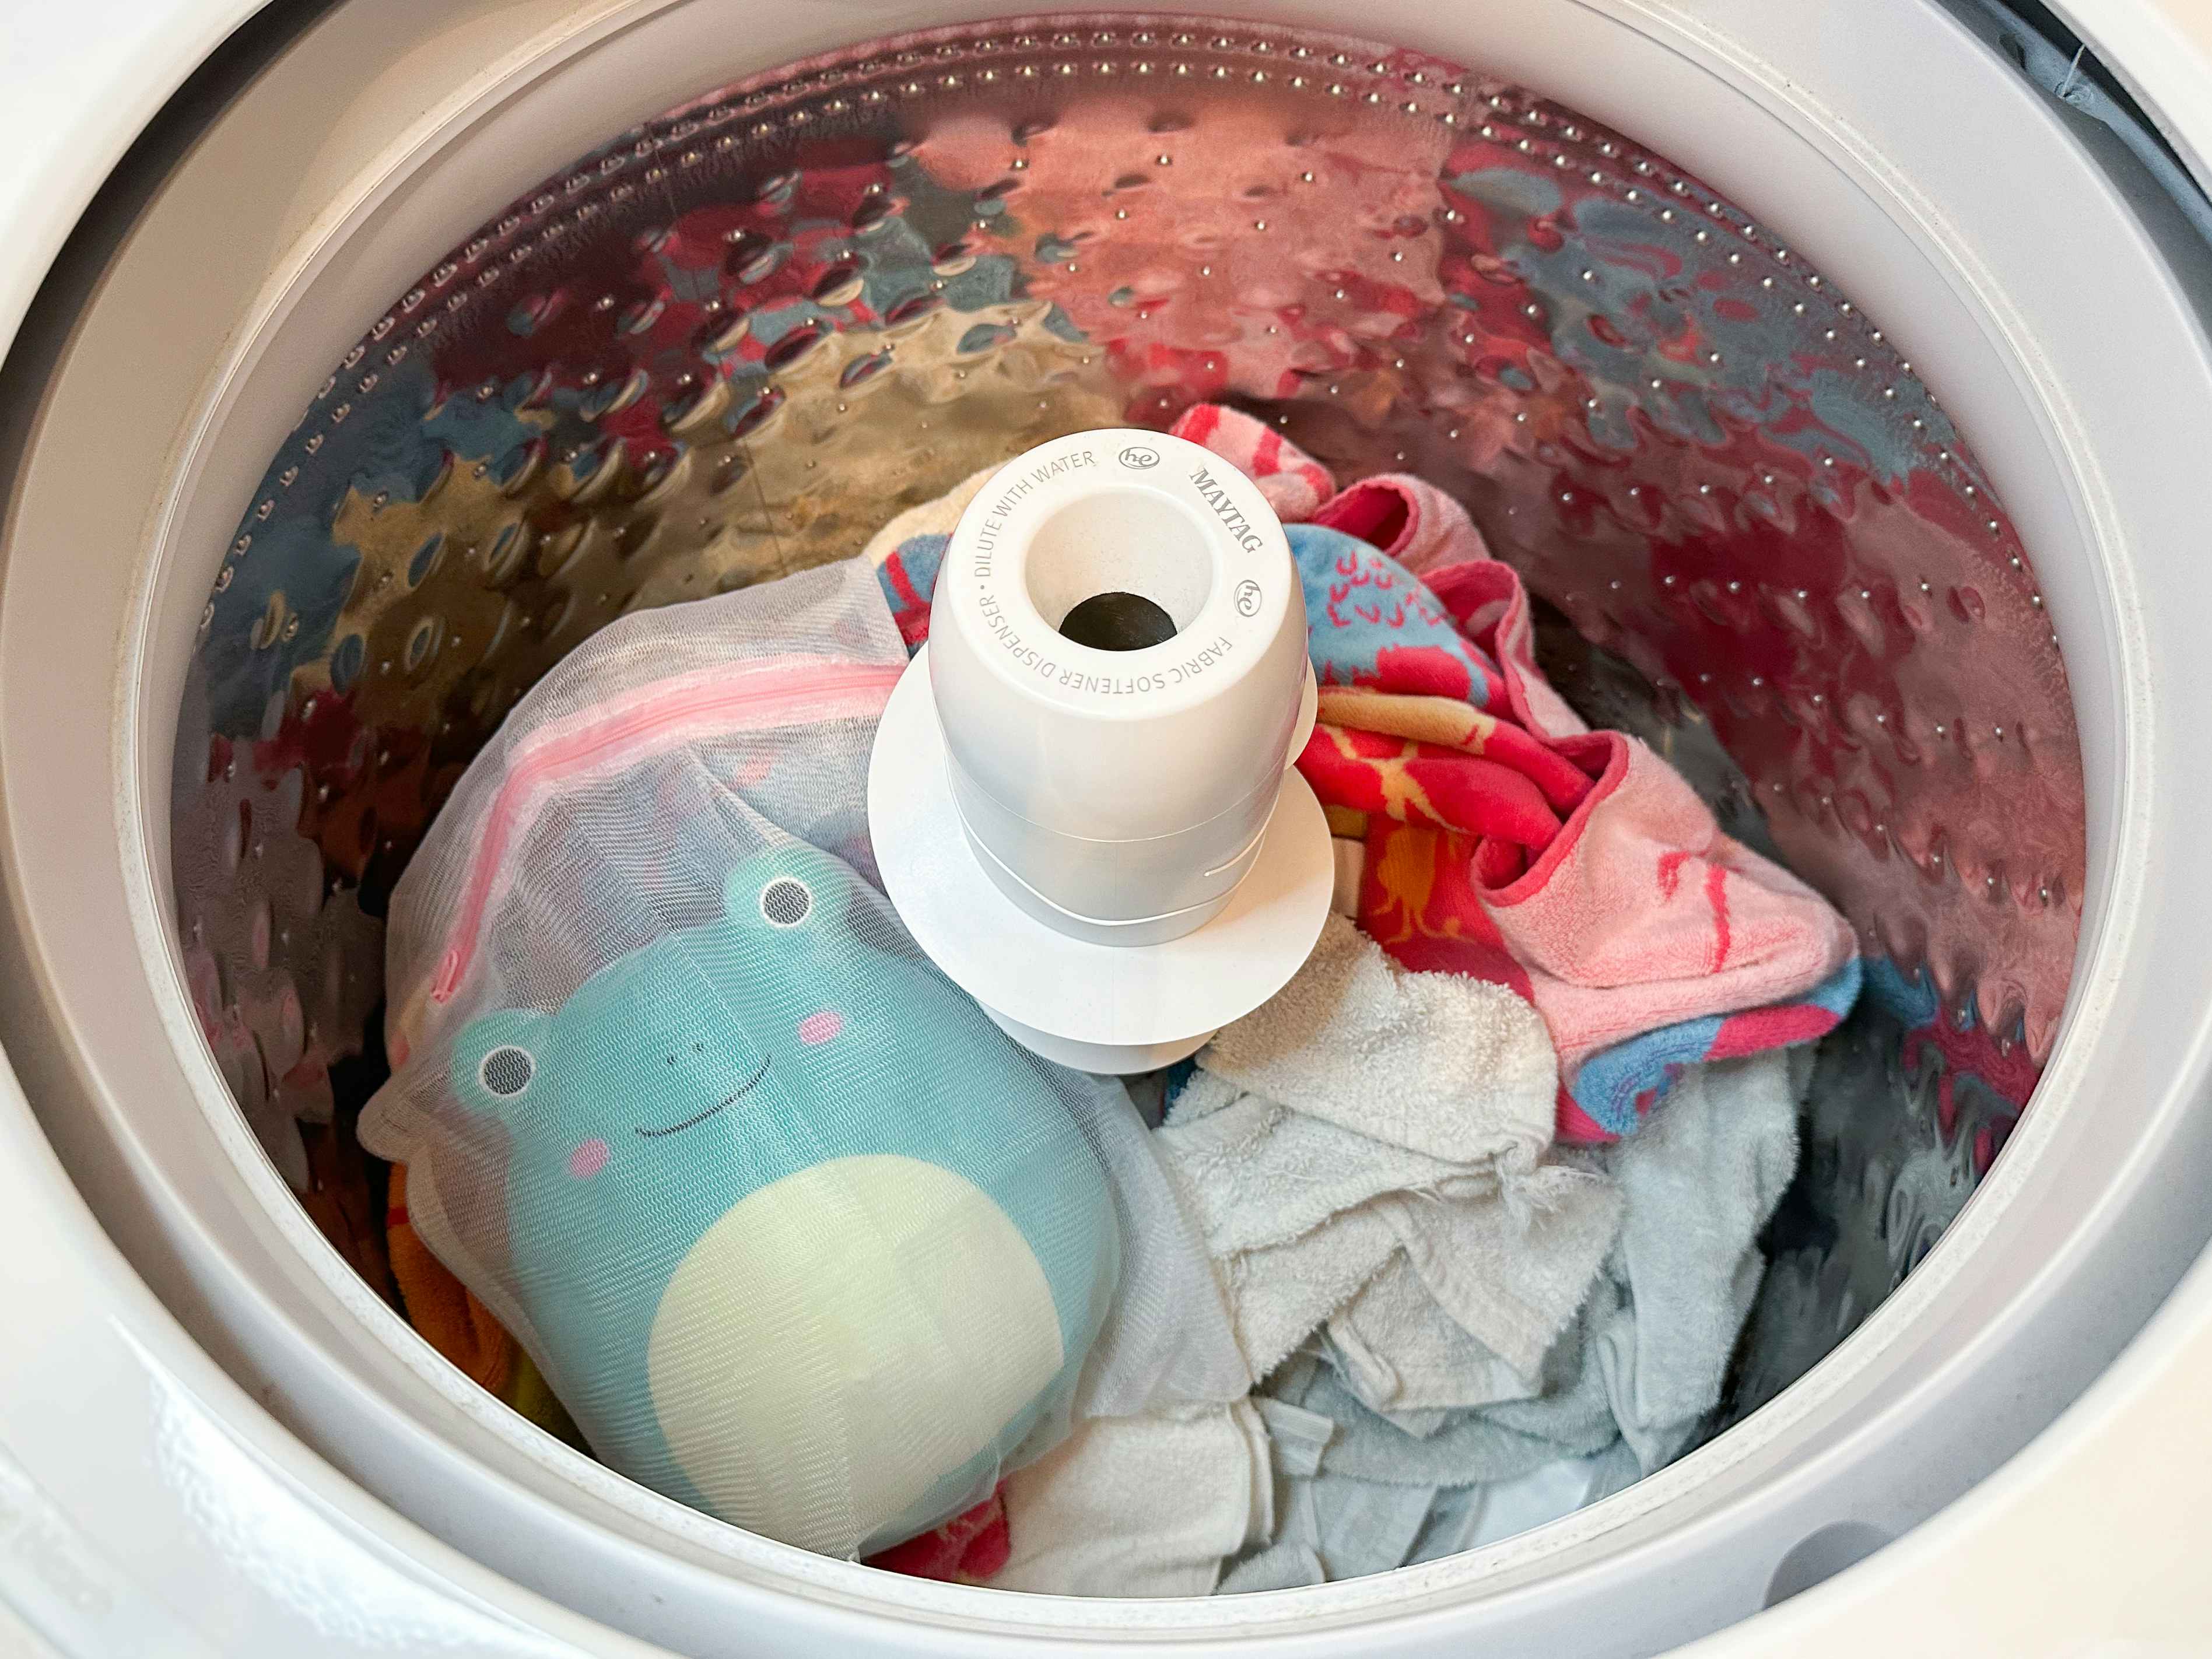 A Squishmallow in a mesh bag in a washing machine with towels